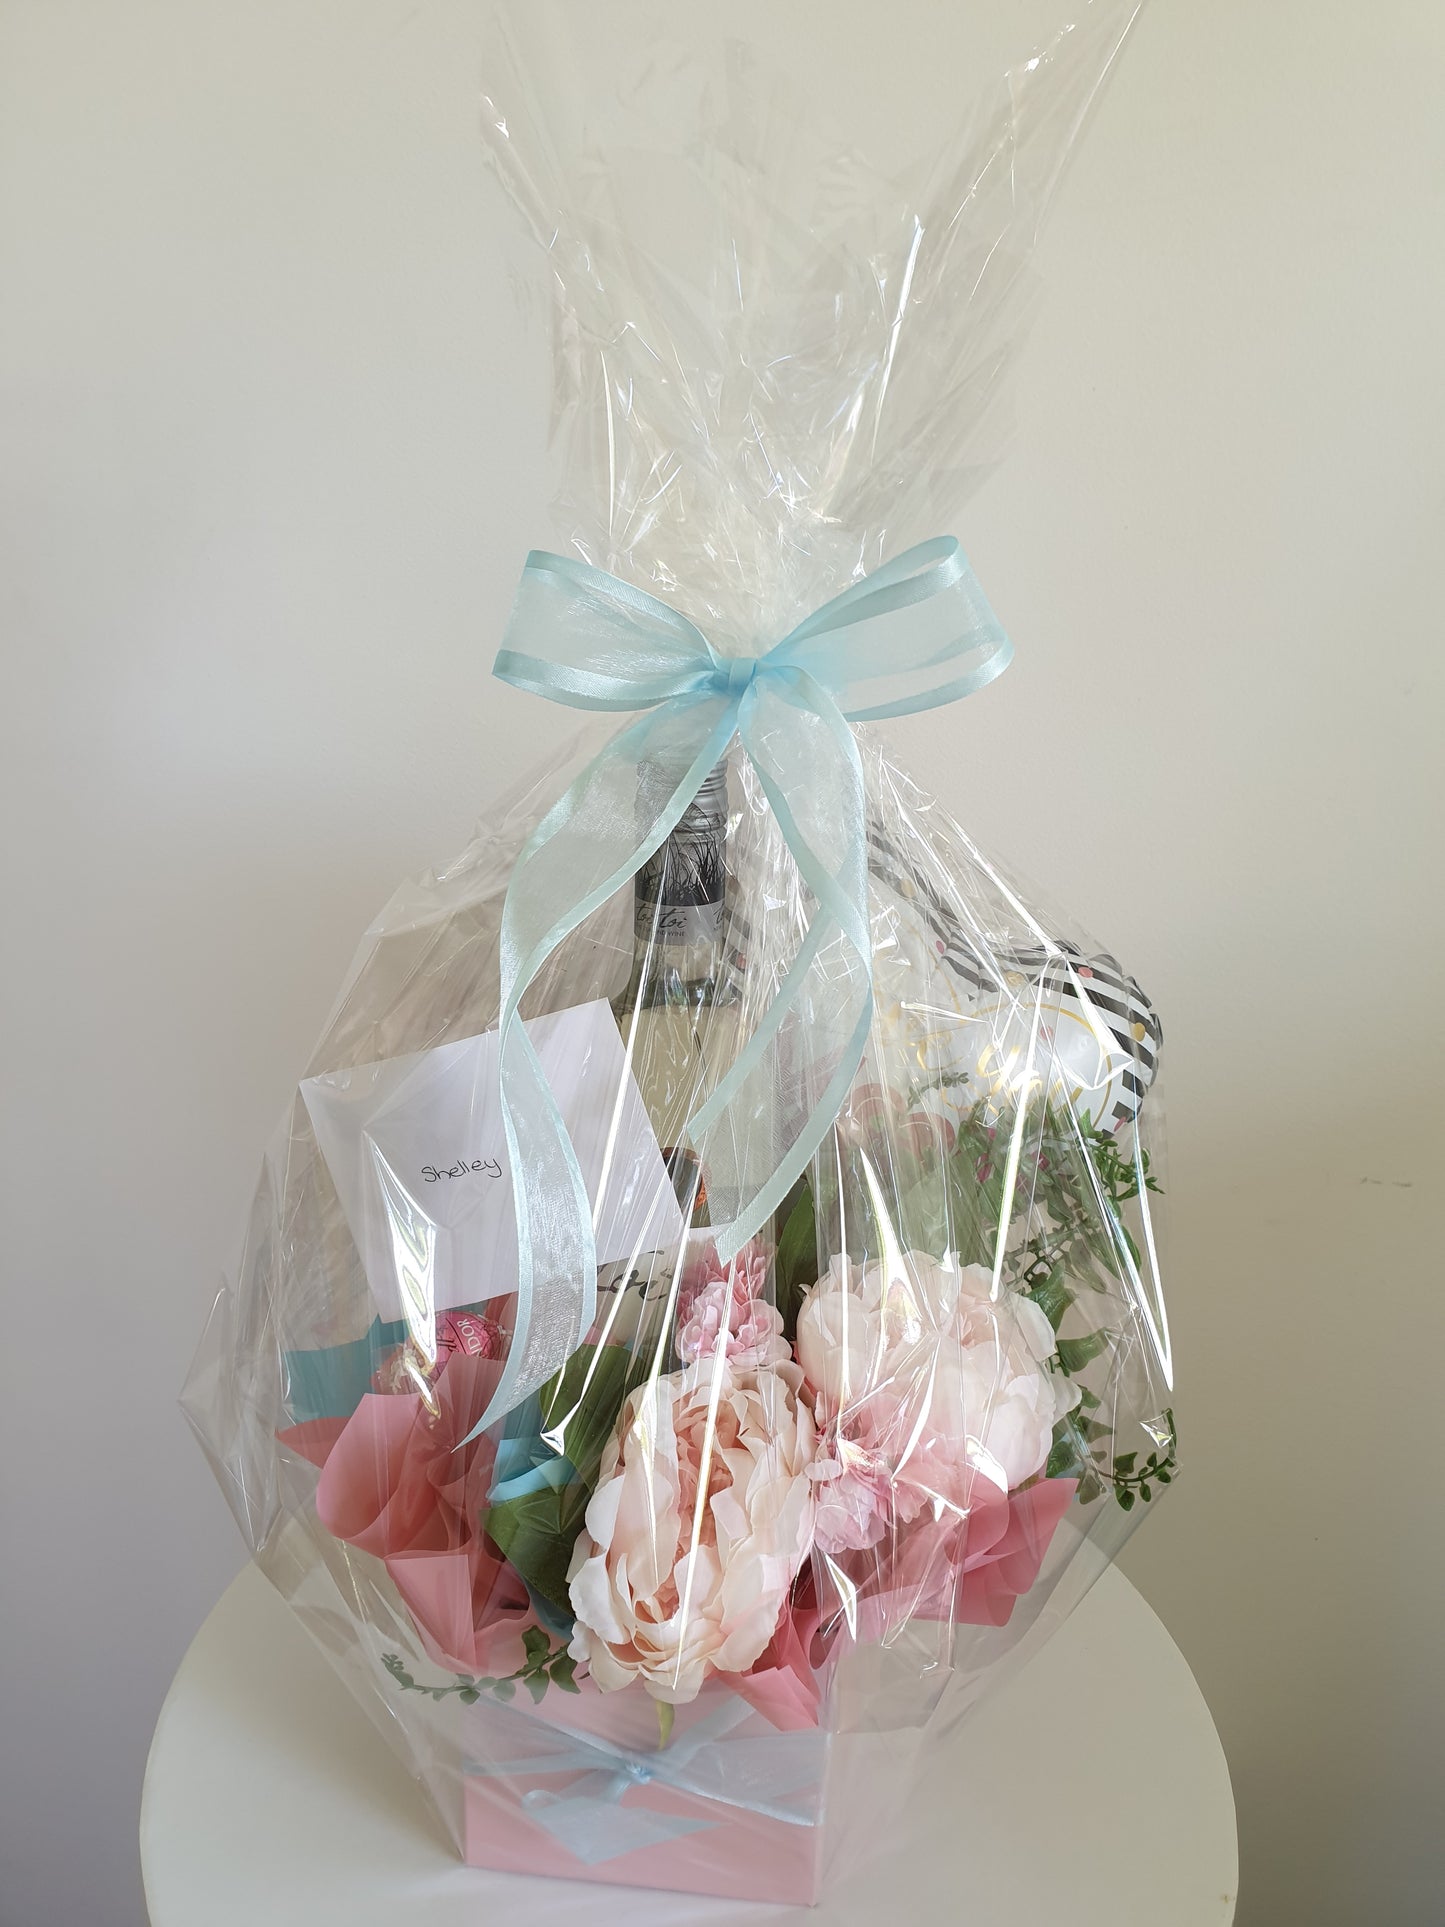 Pretty in Pink Wine and Chocolate Mother's Day with Balloons Gift Bouquet